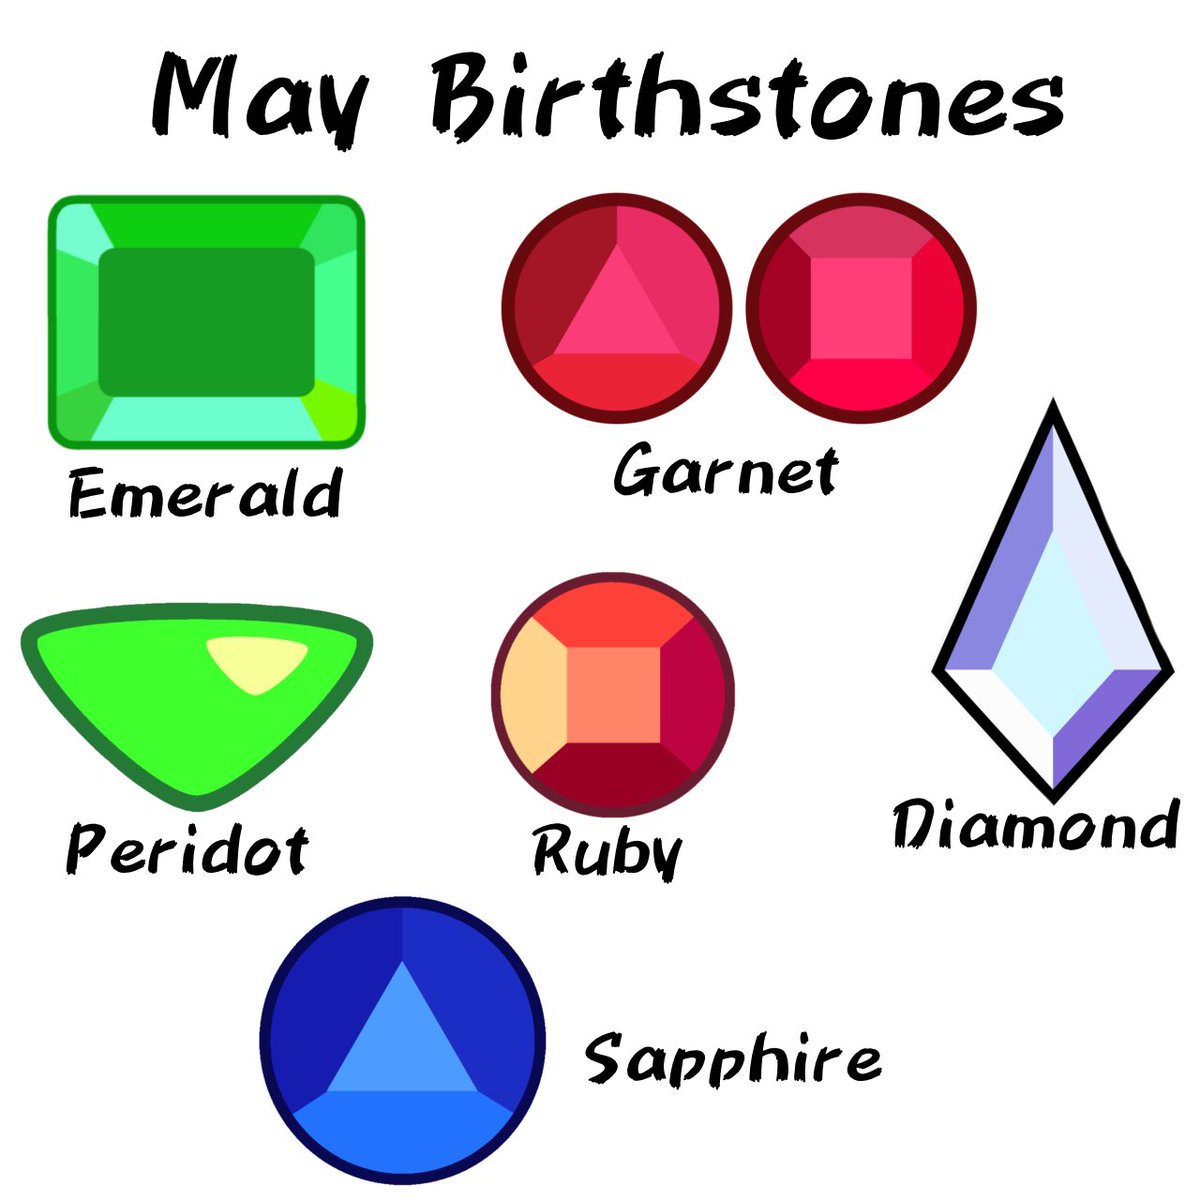 The Birthstones of May.